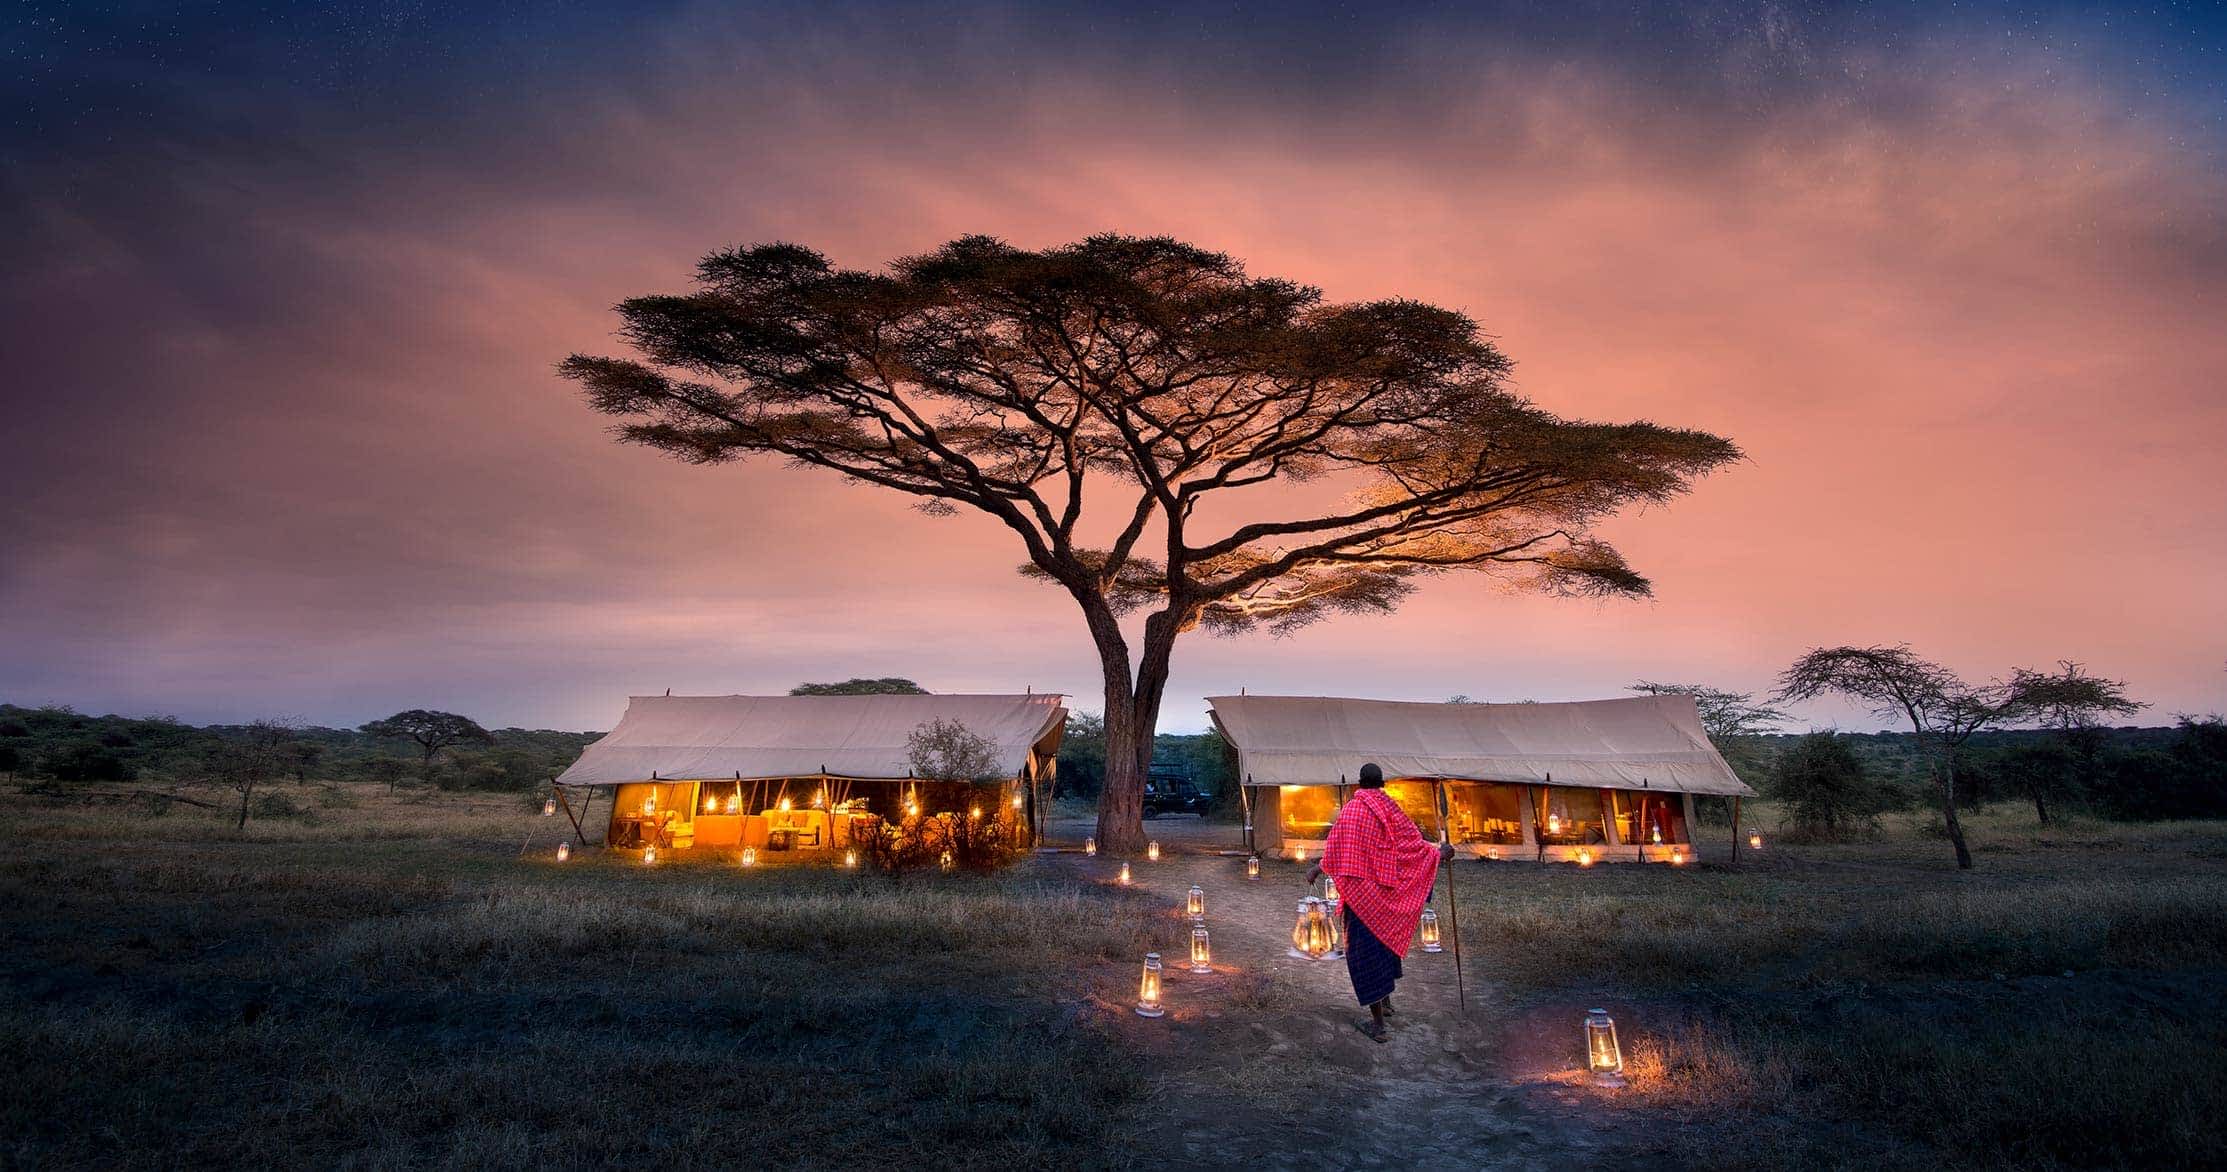 Hotels in the Serengeti National Park